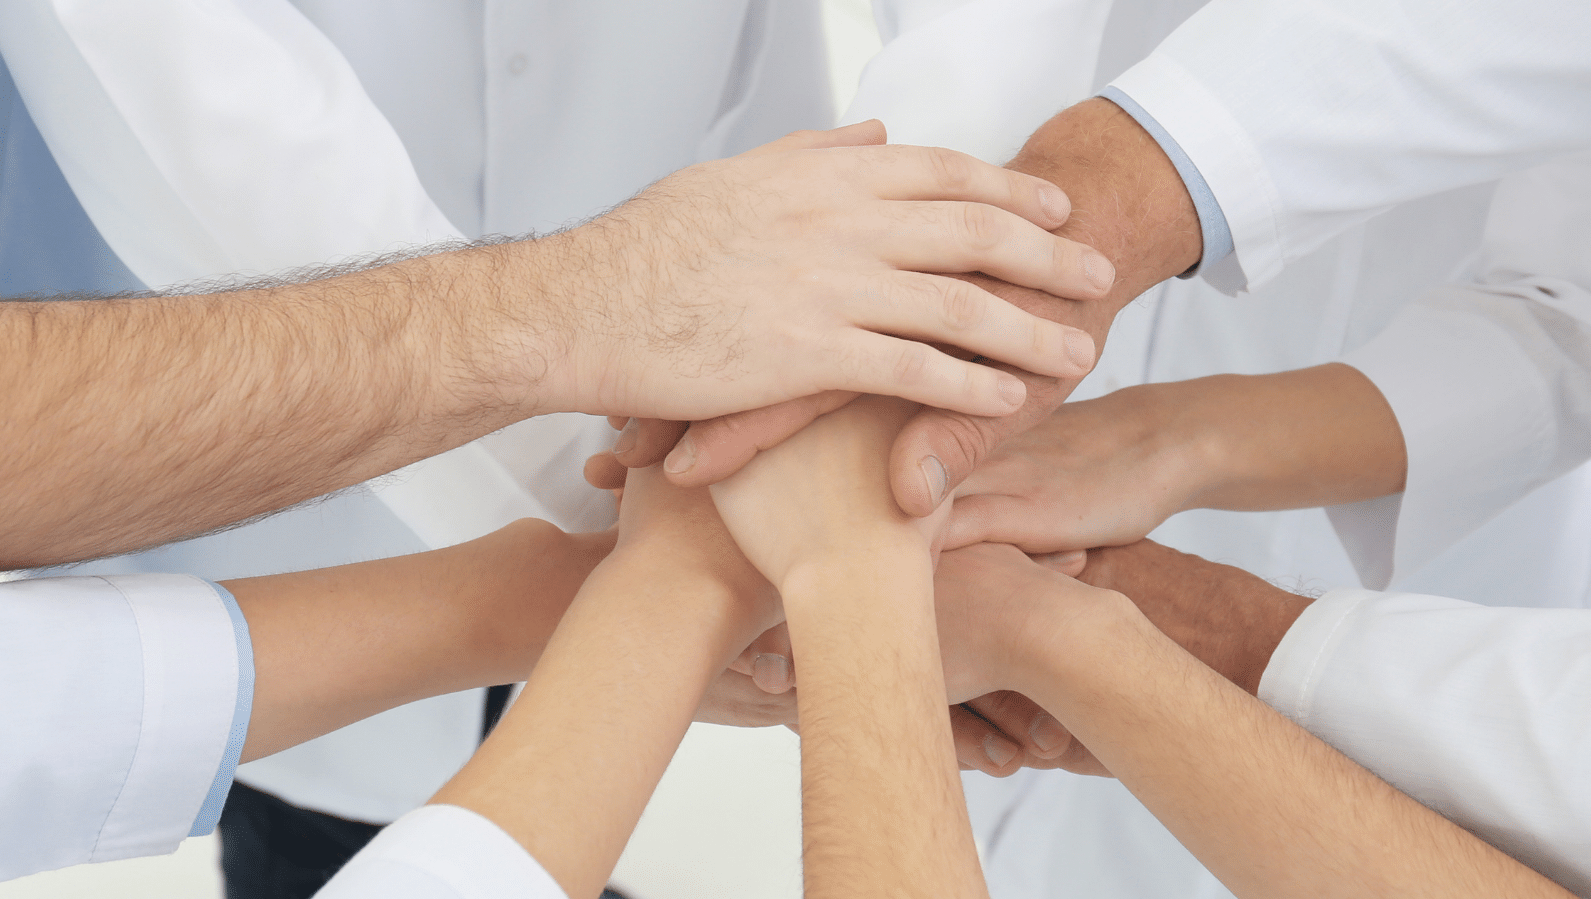 Doctors are placing hands together for health systems.